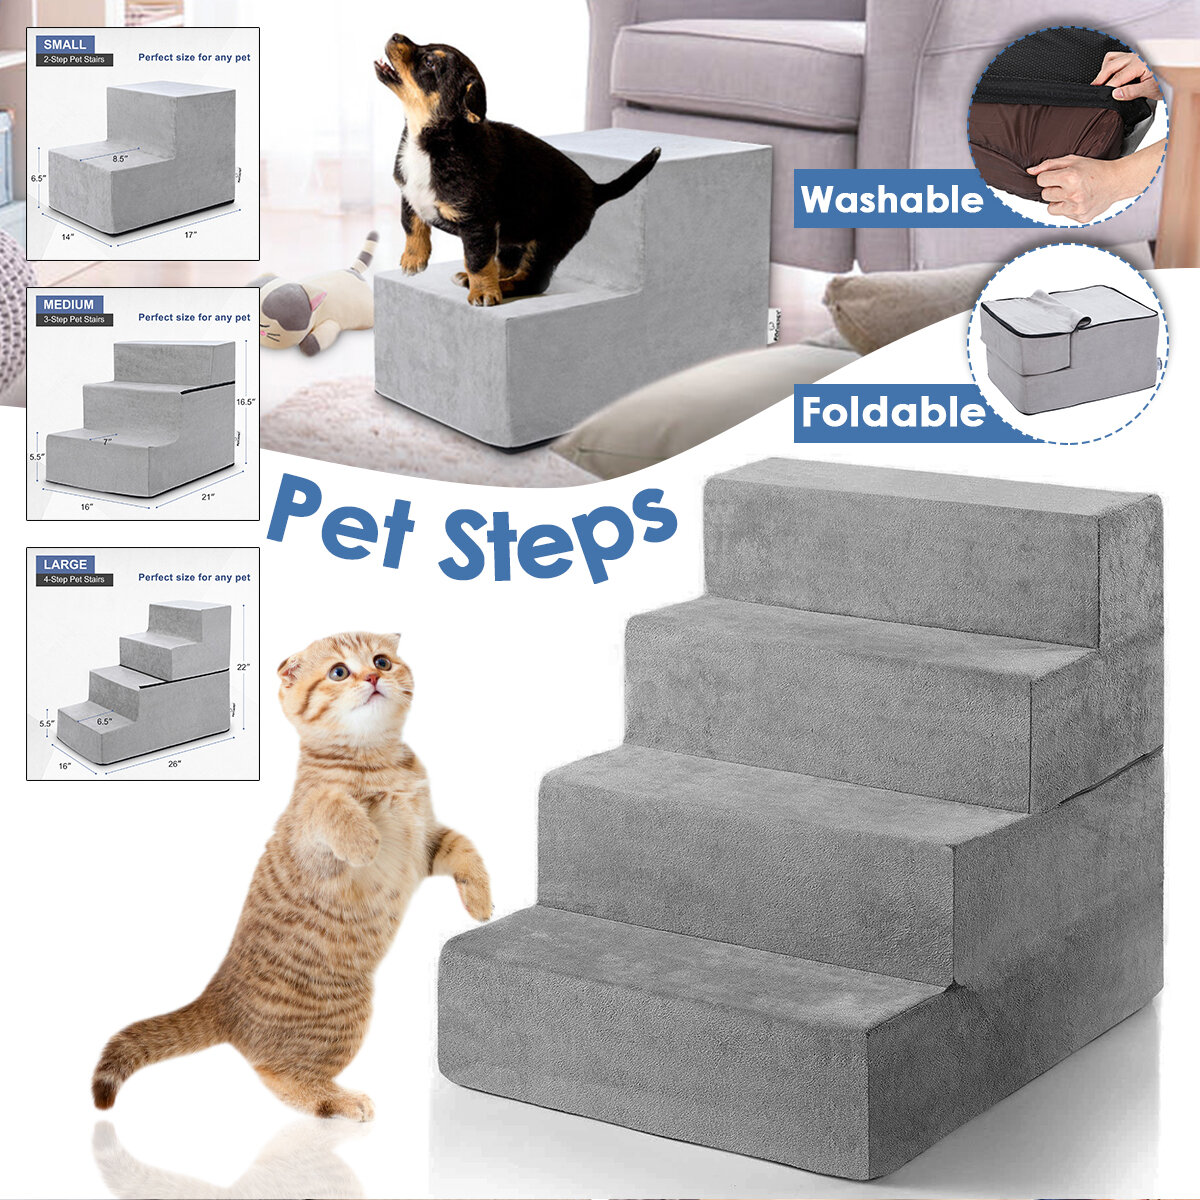 Steps Pet Stairs Climb Foam Ladder Cover Indoor Cat Dog Ramp Climbing Cover Puppy Supplies